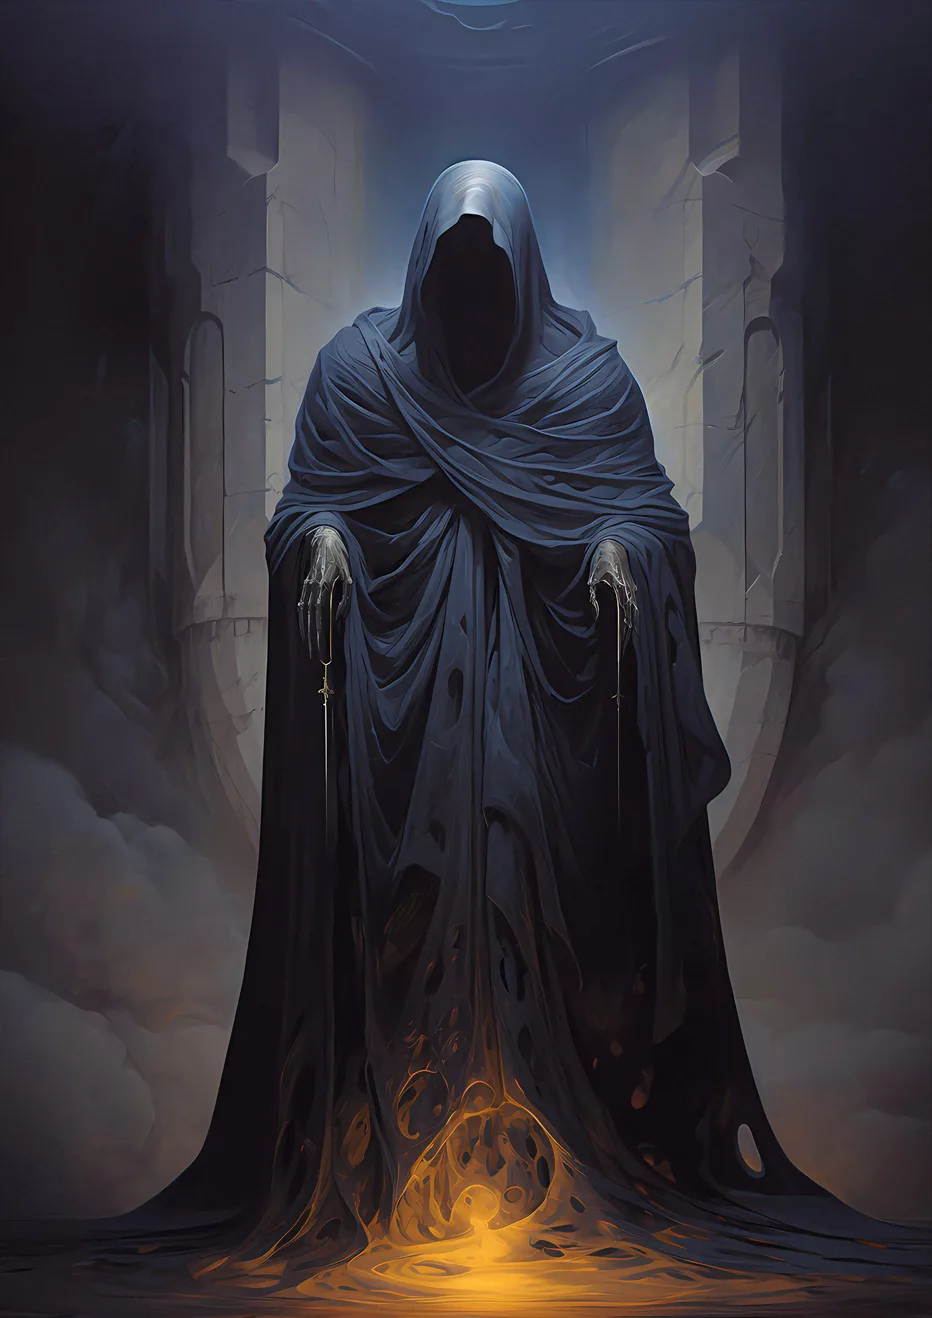 The Sorcerer of the Abyss - Hooded skeleton casting a spell surrounded by mystical flames and stone pillars.